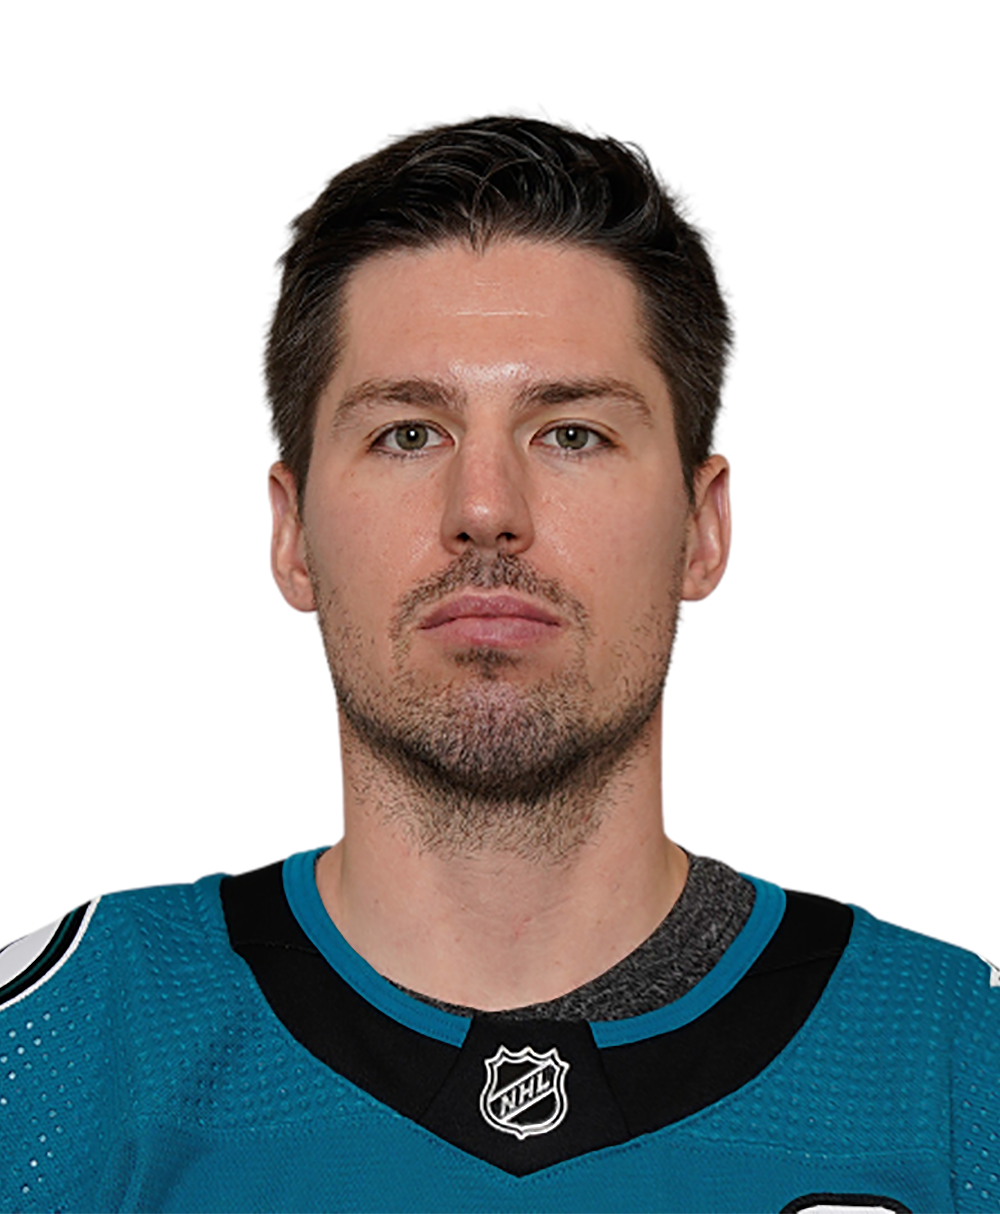 Logan Couture - The Hockey Writers